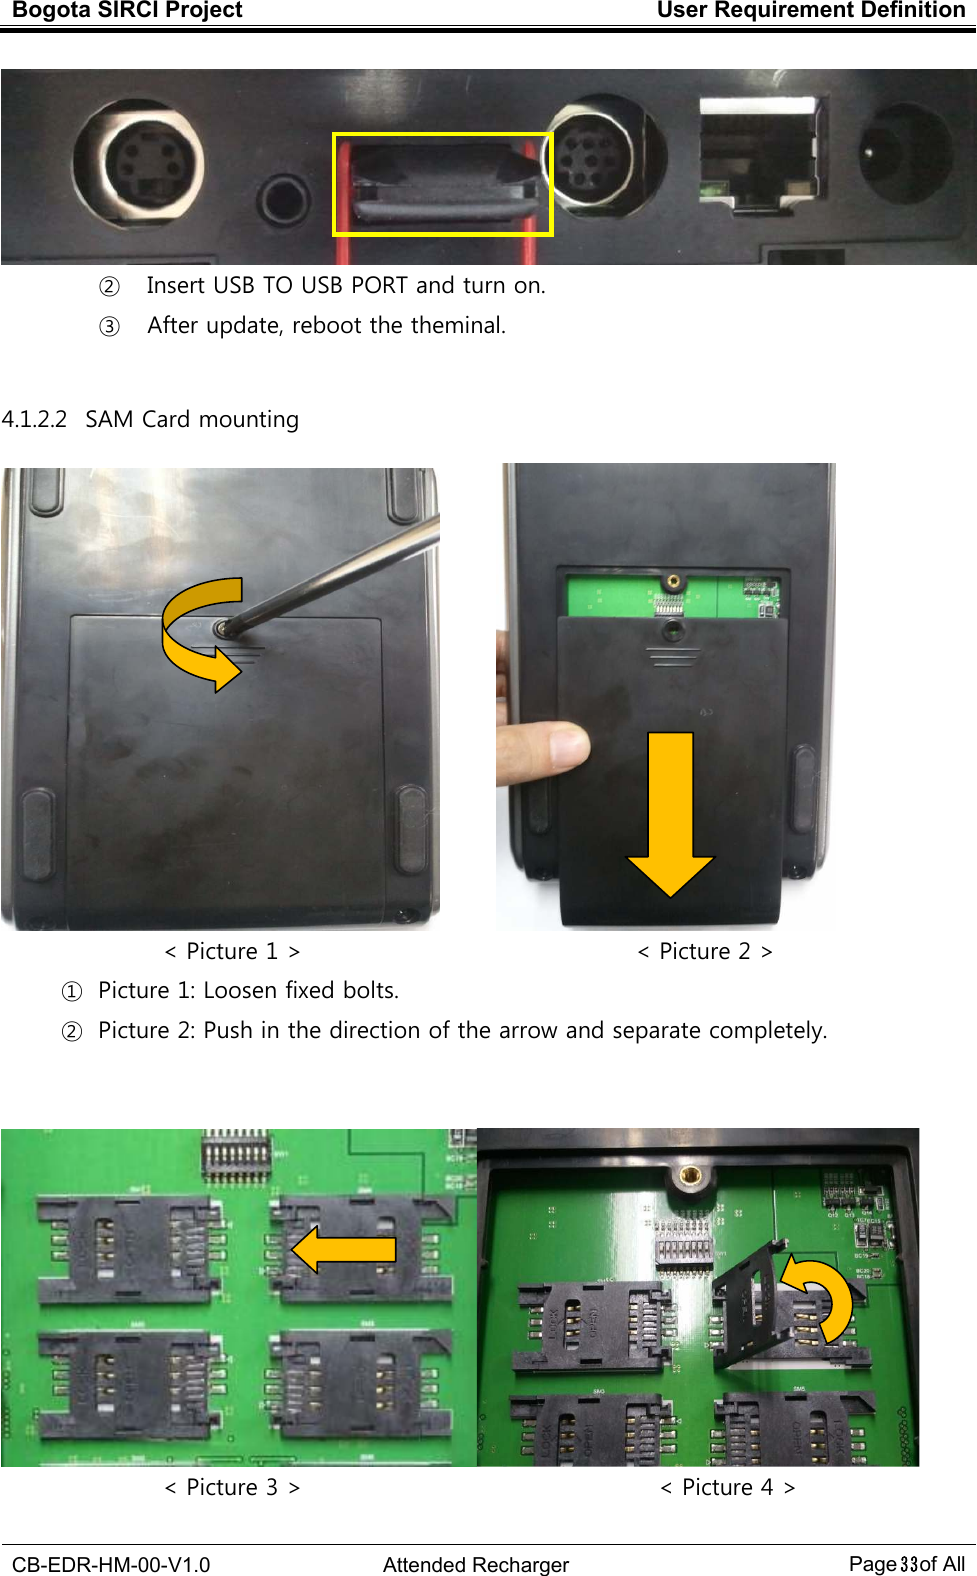 Bogota SIRCI Project  User Requirement Definition  CB-EDR-HM-00-V1.0  Attended Recharger Page３３ of All   ②   Insert USB TO USB PORT and turn on. ③   After update, reboot the theminal.  4.1.2.2   SAM Card mounting        &lt; Picture 1 &gt;                                                          &lt; Picture 2 &gt; ① Picture 1: Loosen fixed bolts. ② Picture 2: Push in the direction of the arrow and separate completely.    &lt; Picture 3 &gt;                                                              &lt; Picture 4 &gt; 